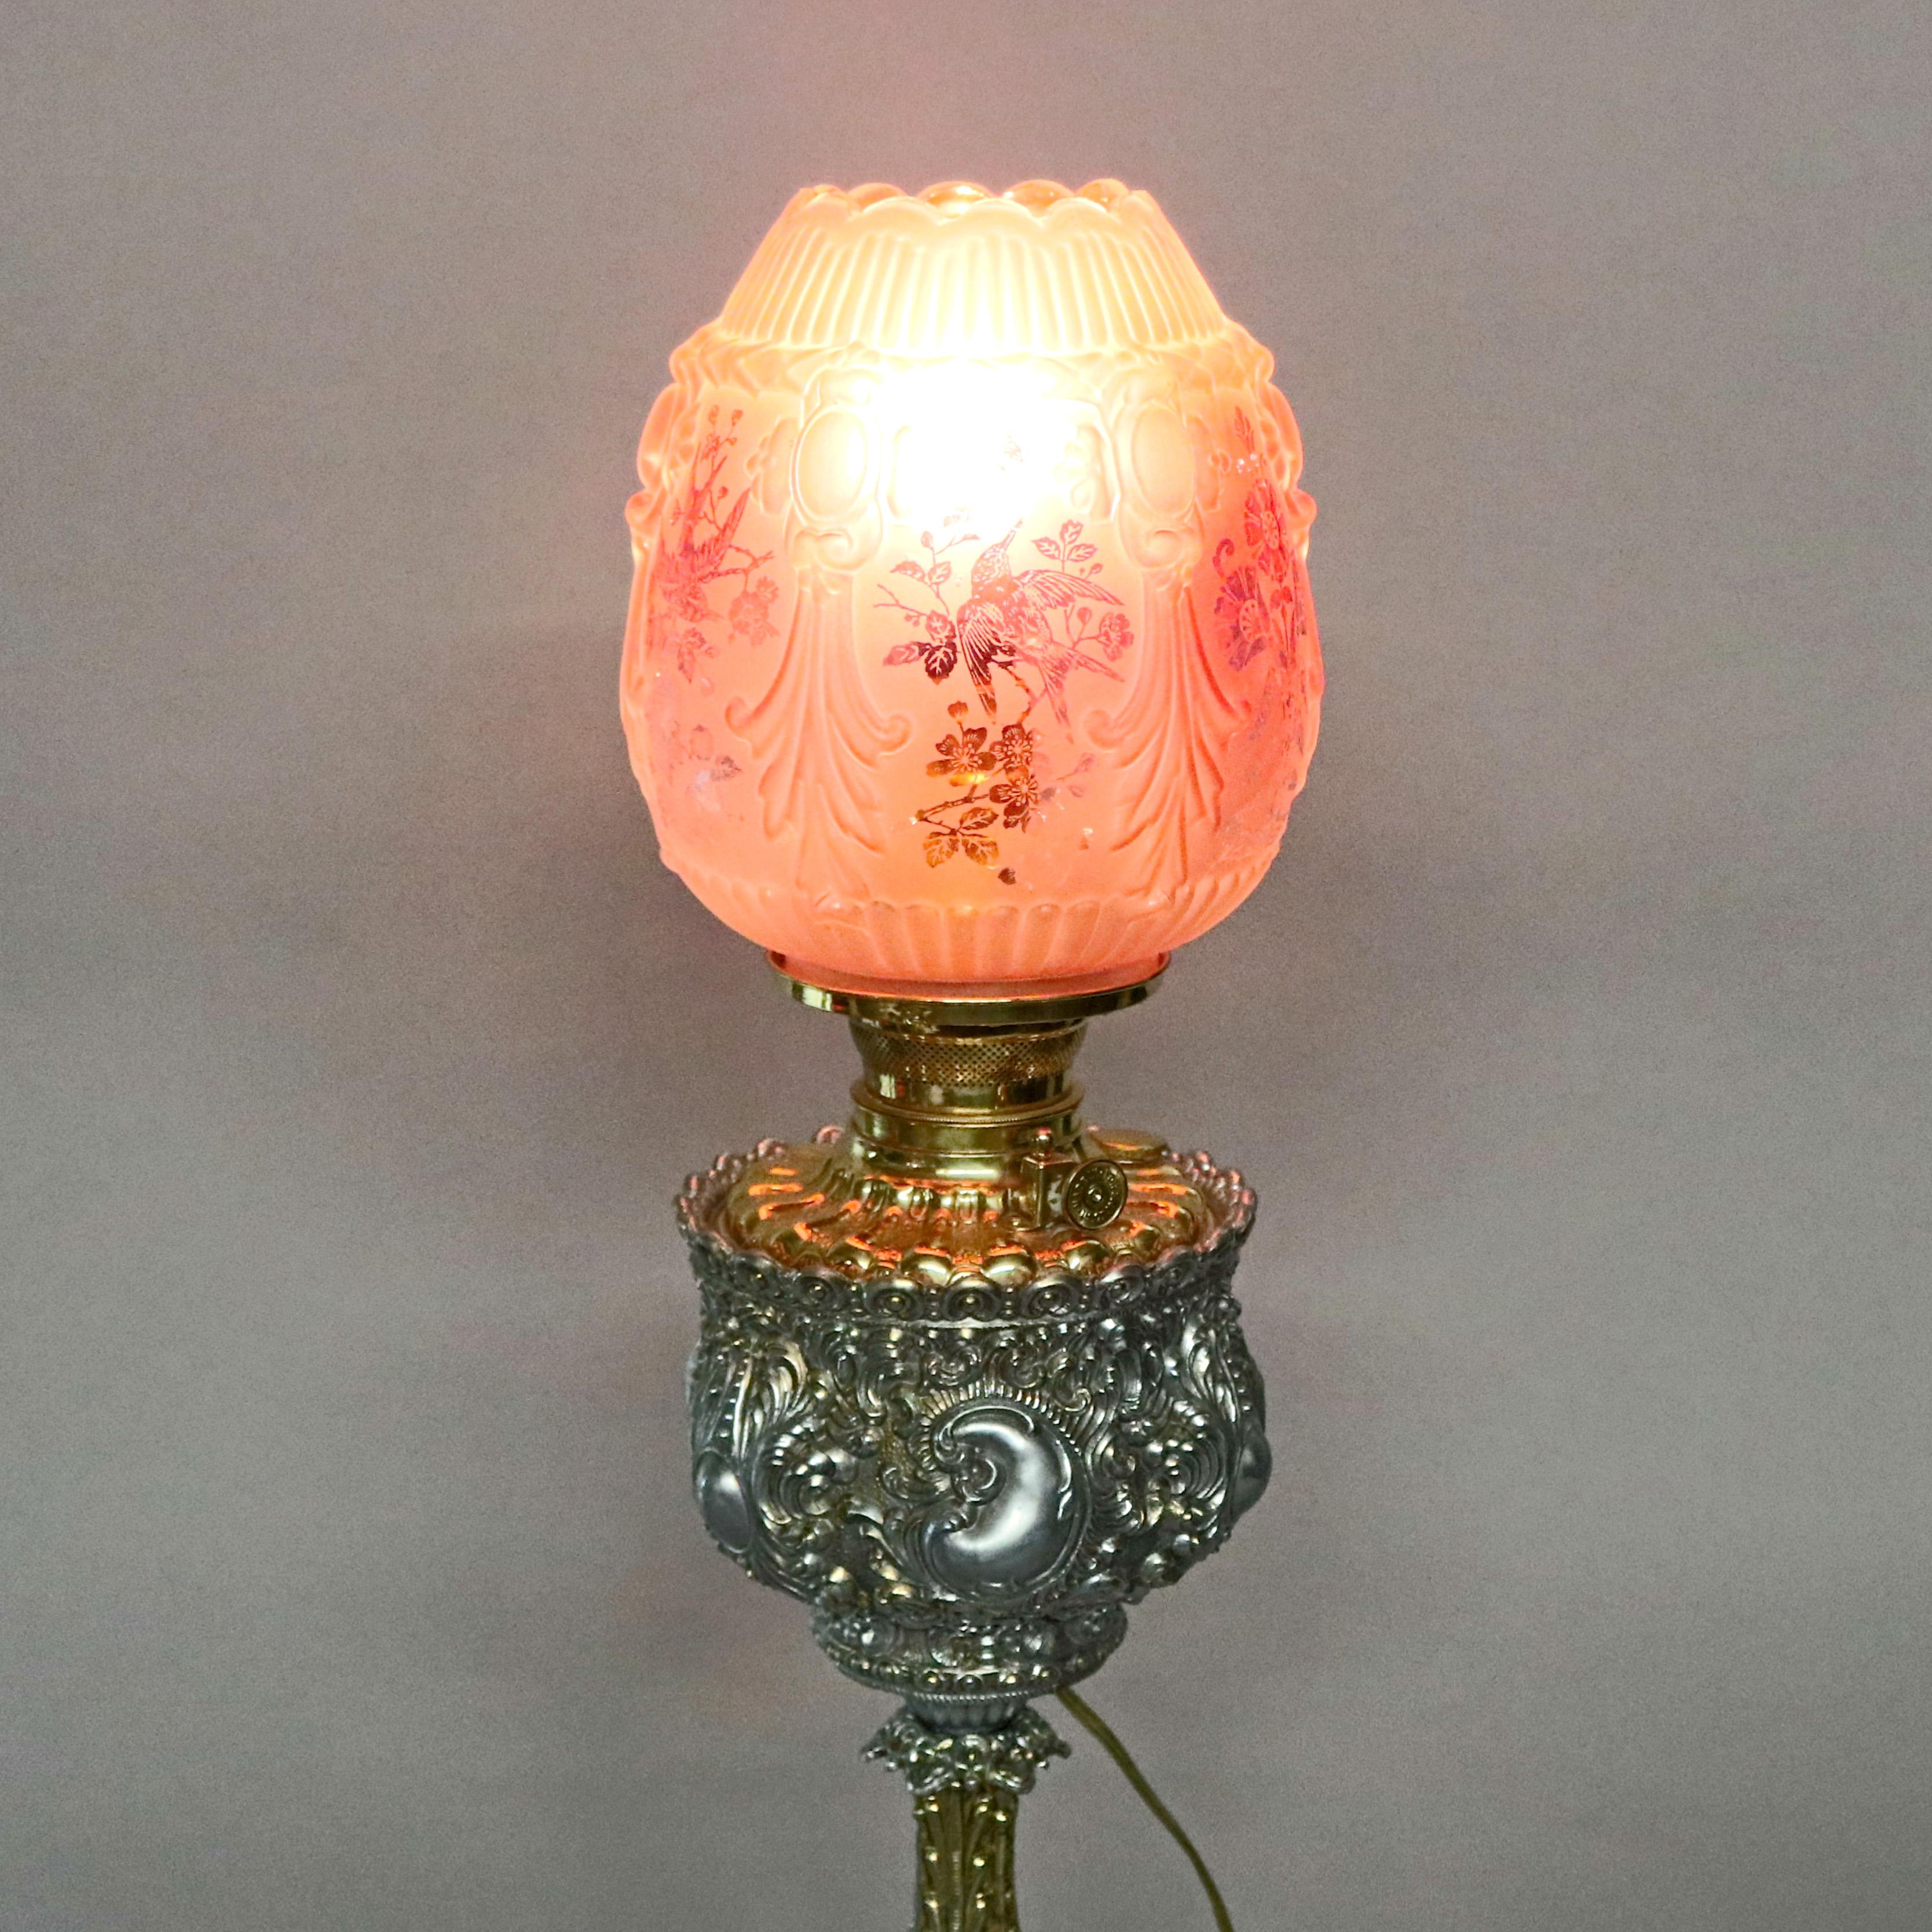 Cast Antique Bradley & Hubbard Rococo Style Lamp with Cranberry Shade, circa 1890